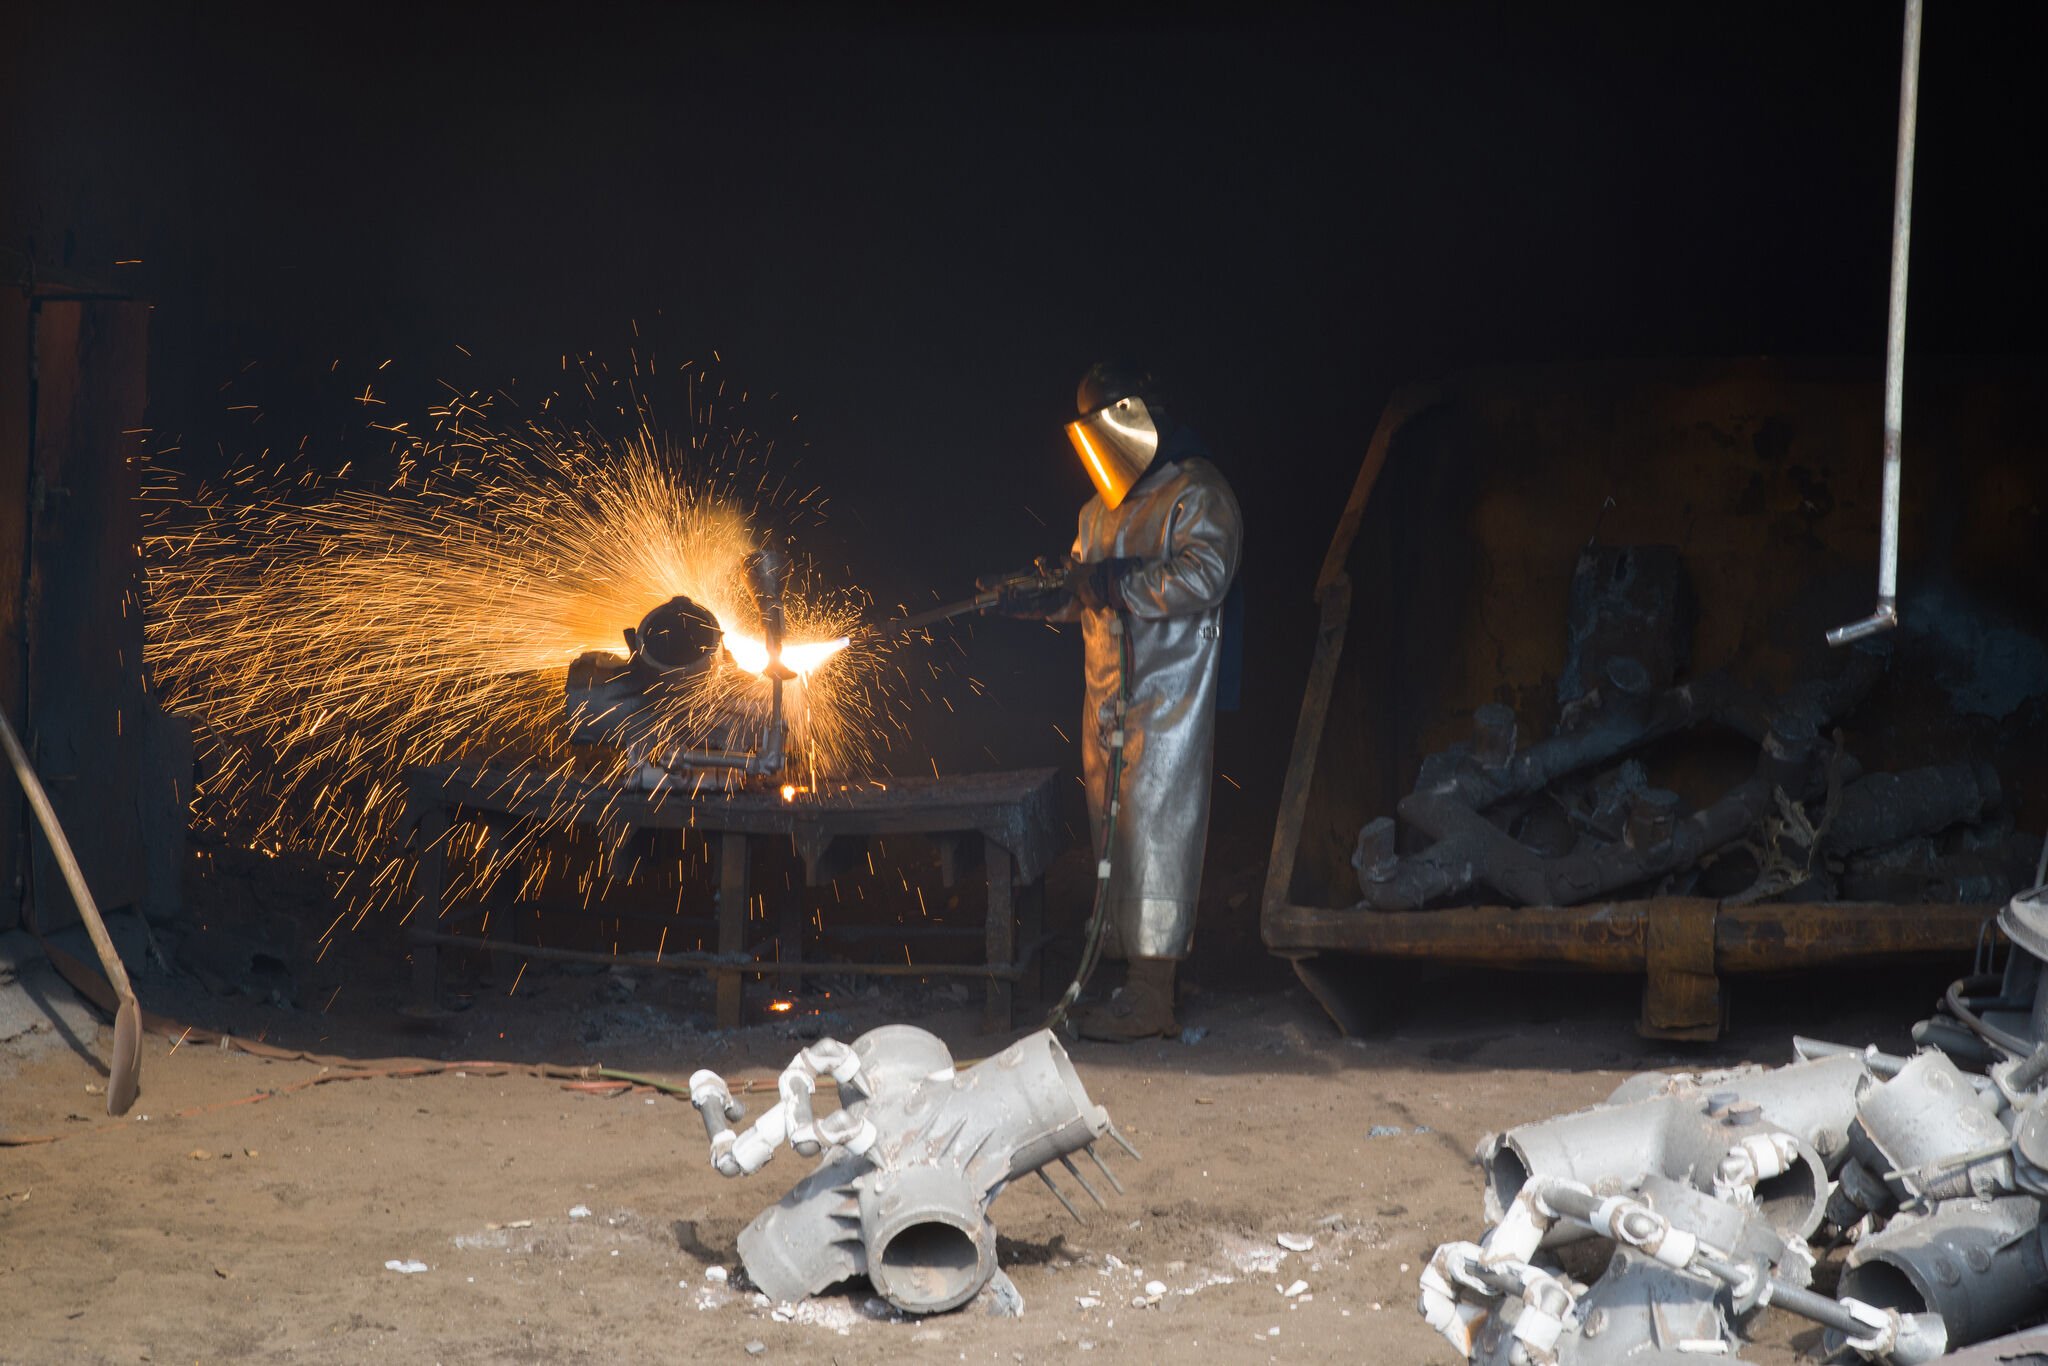 Metalworker welding with sparks flying.